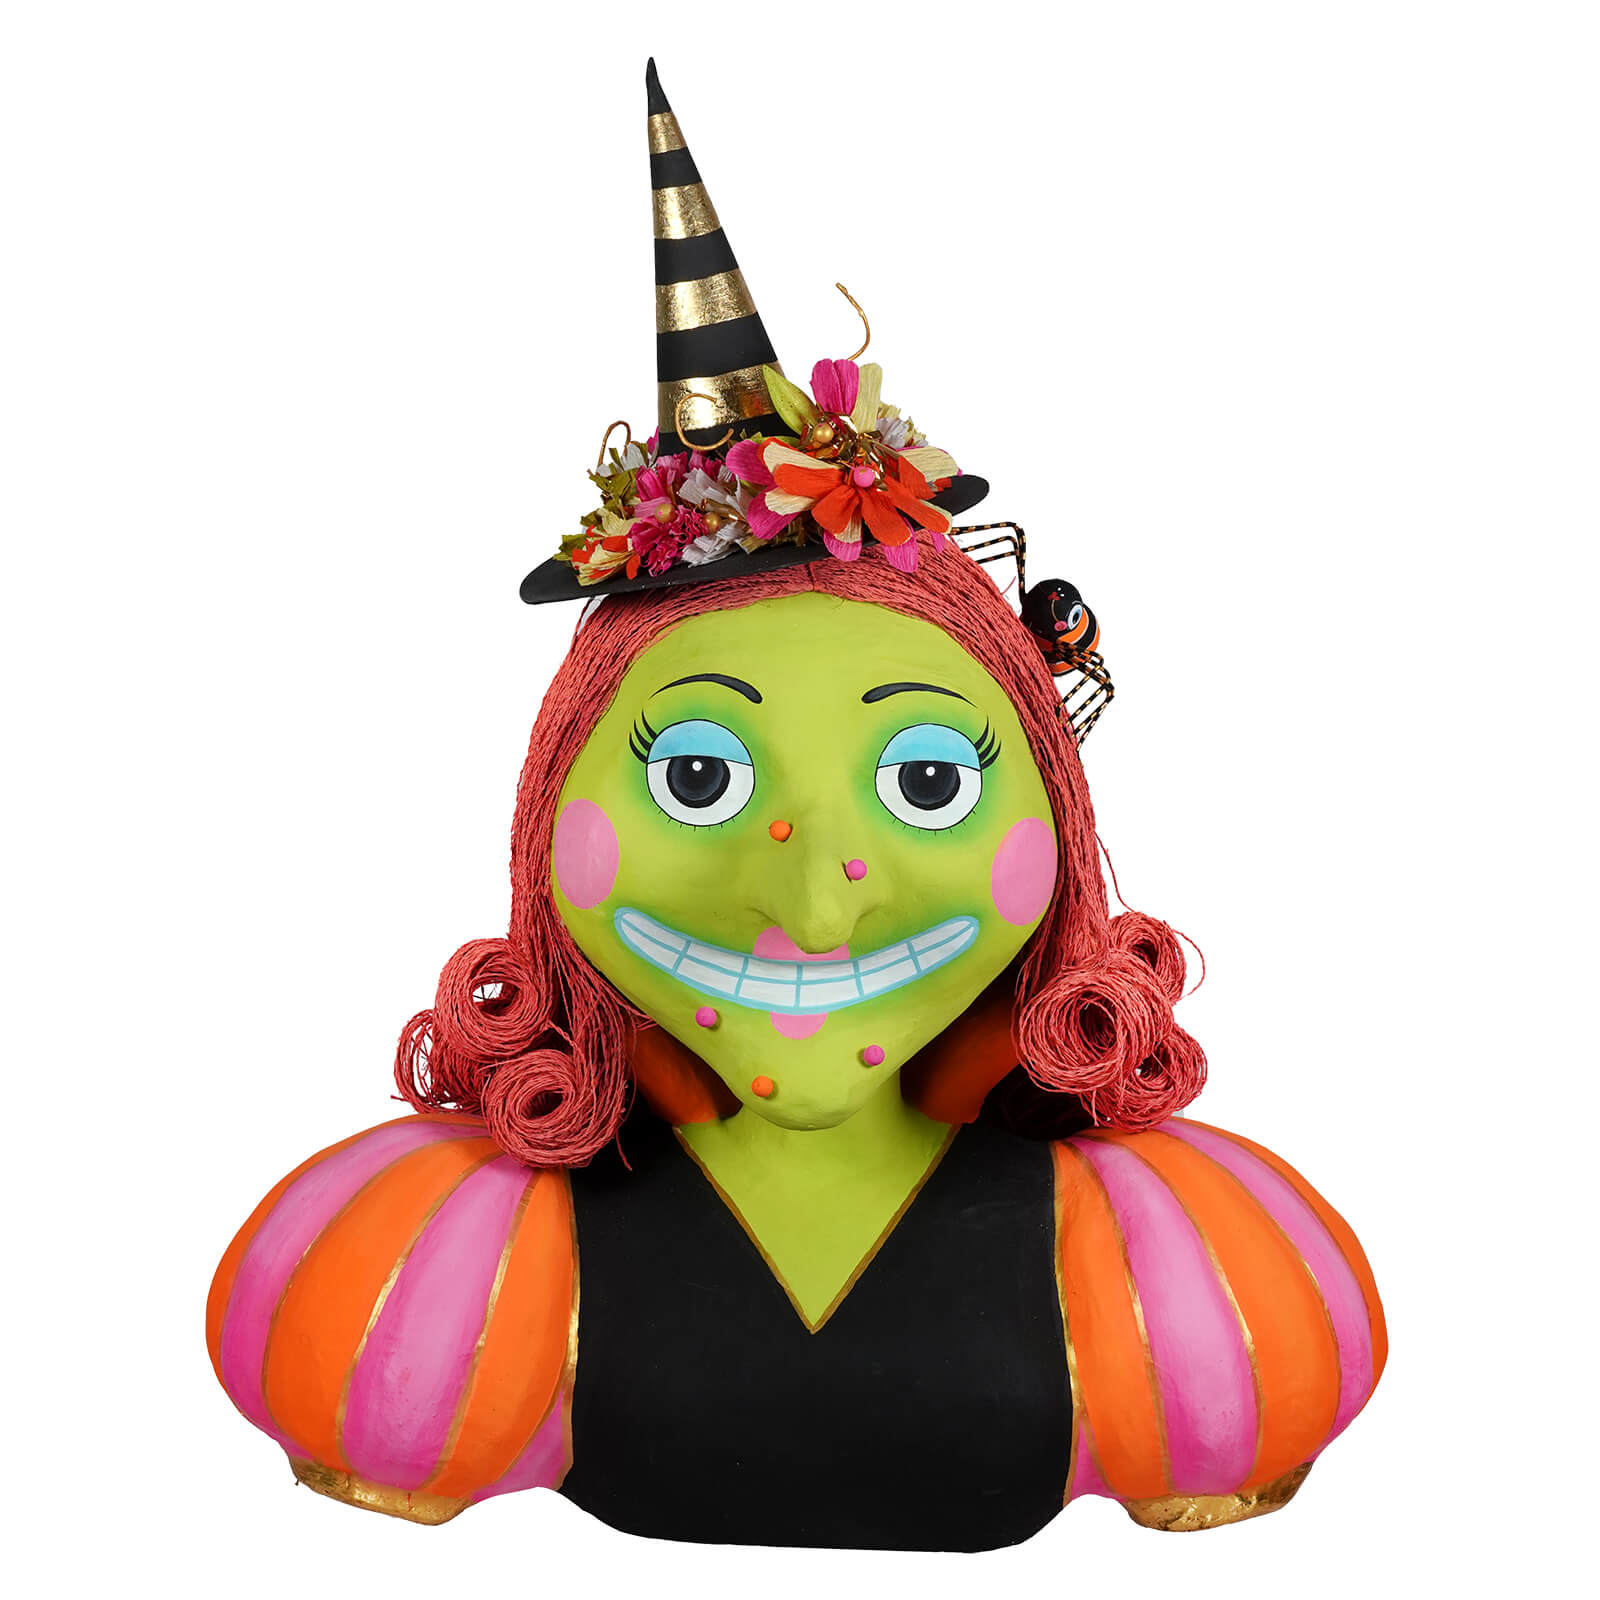 Itchy Witchy Bust Display